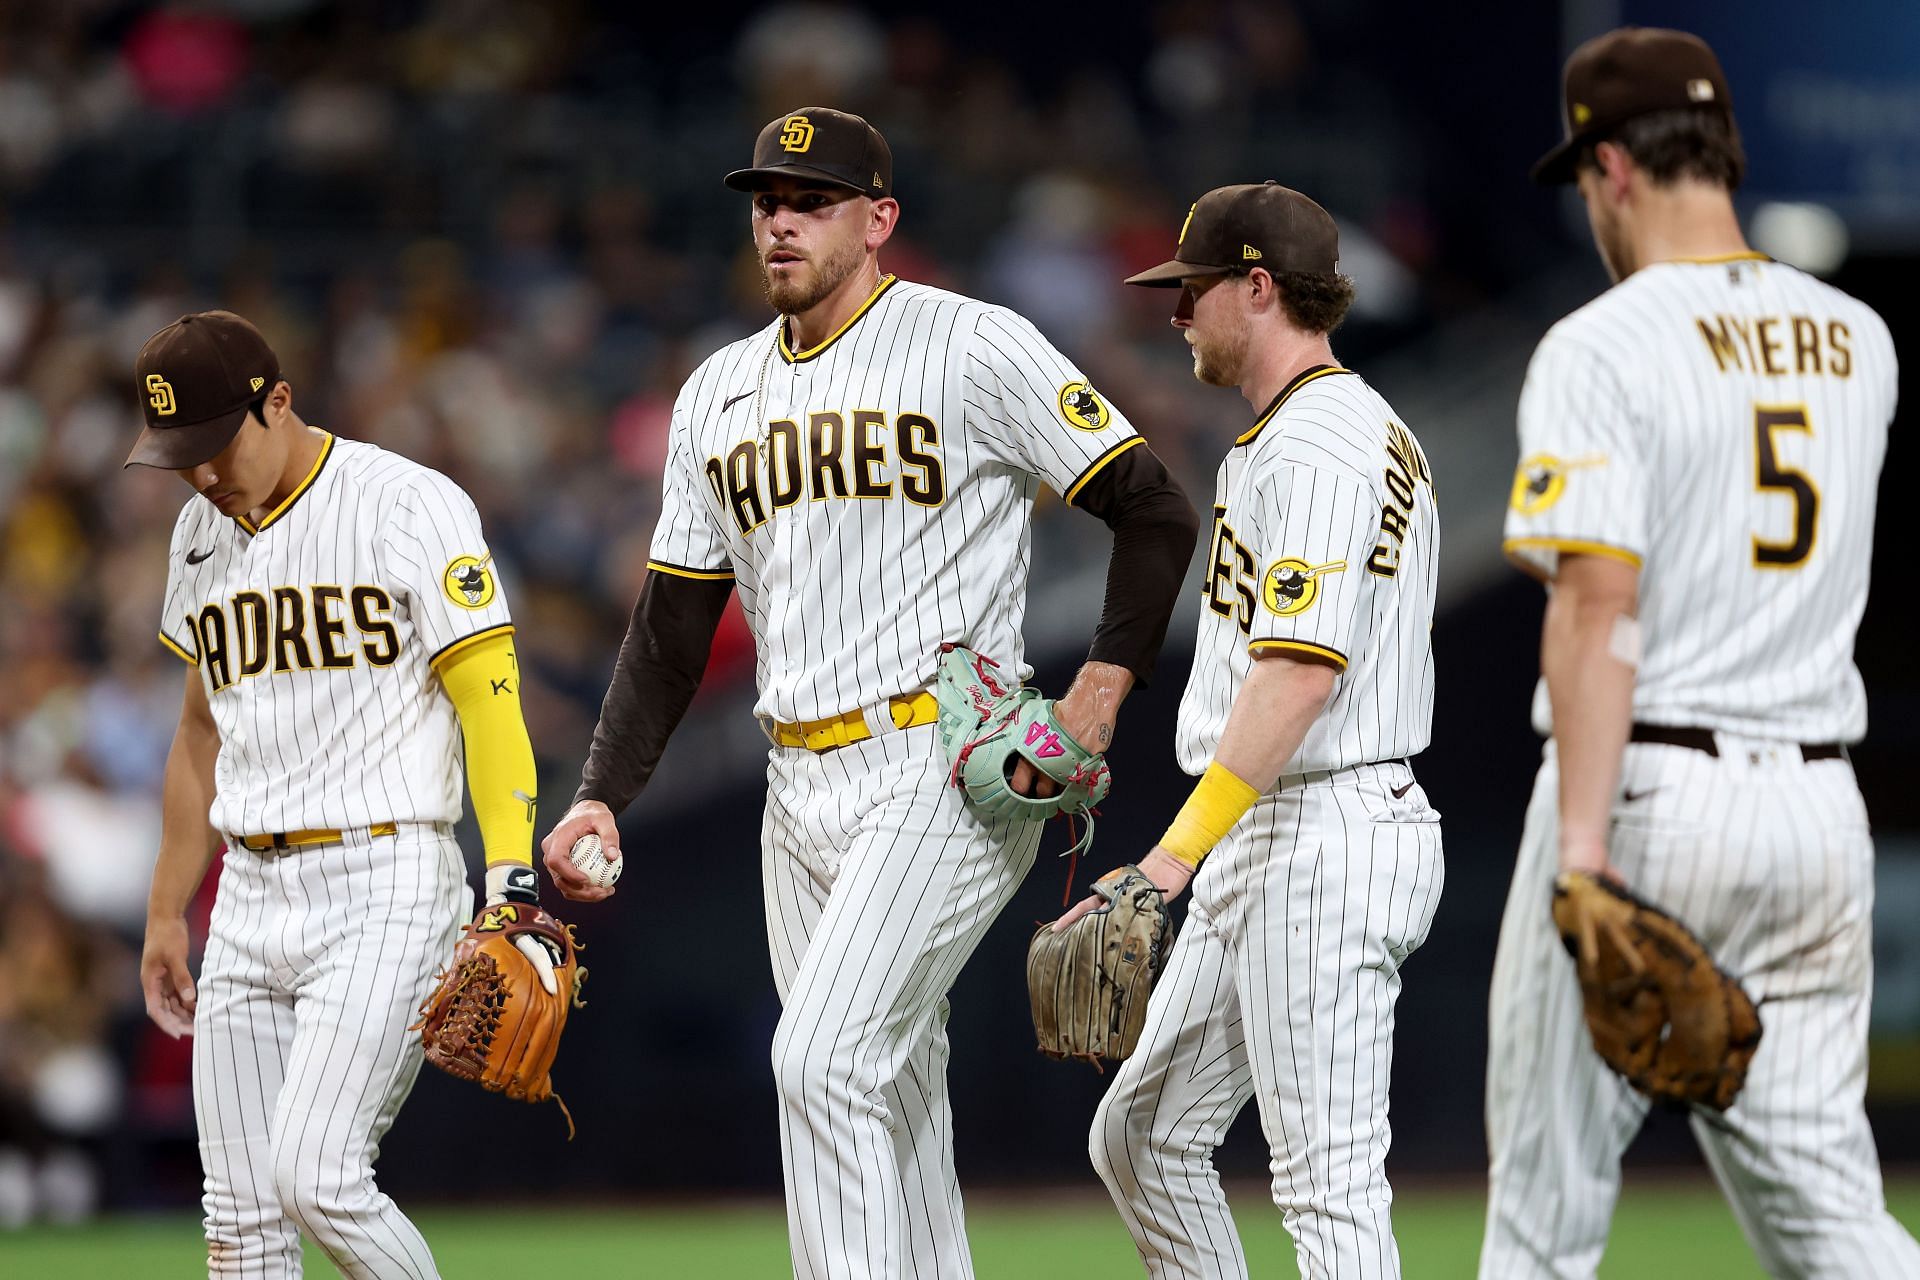 Padres continue to tease fans with retro uniforms - Gaslamp Ball